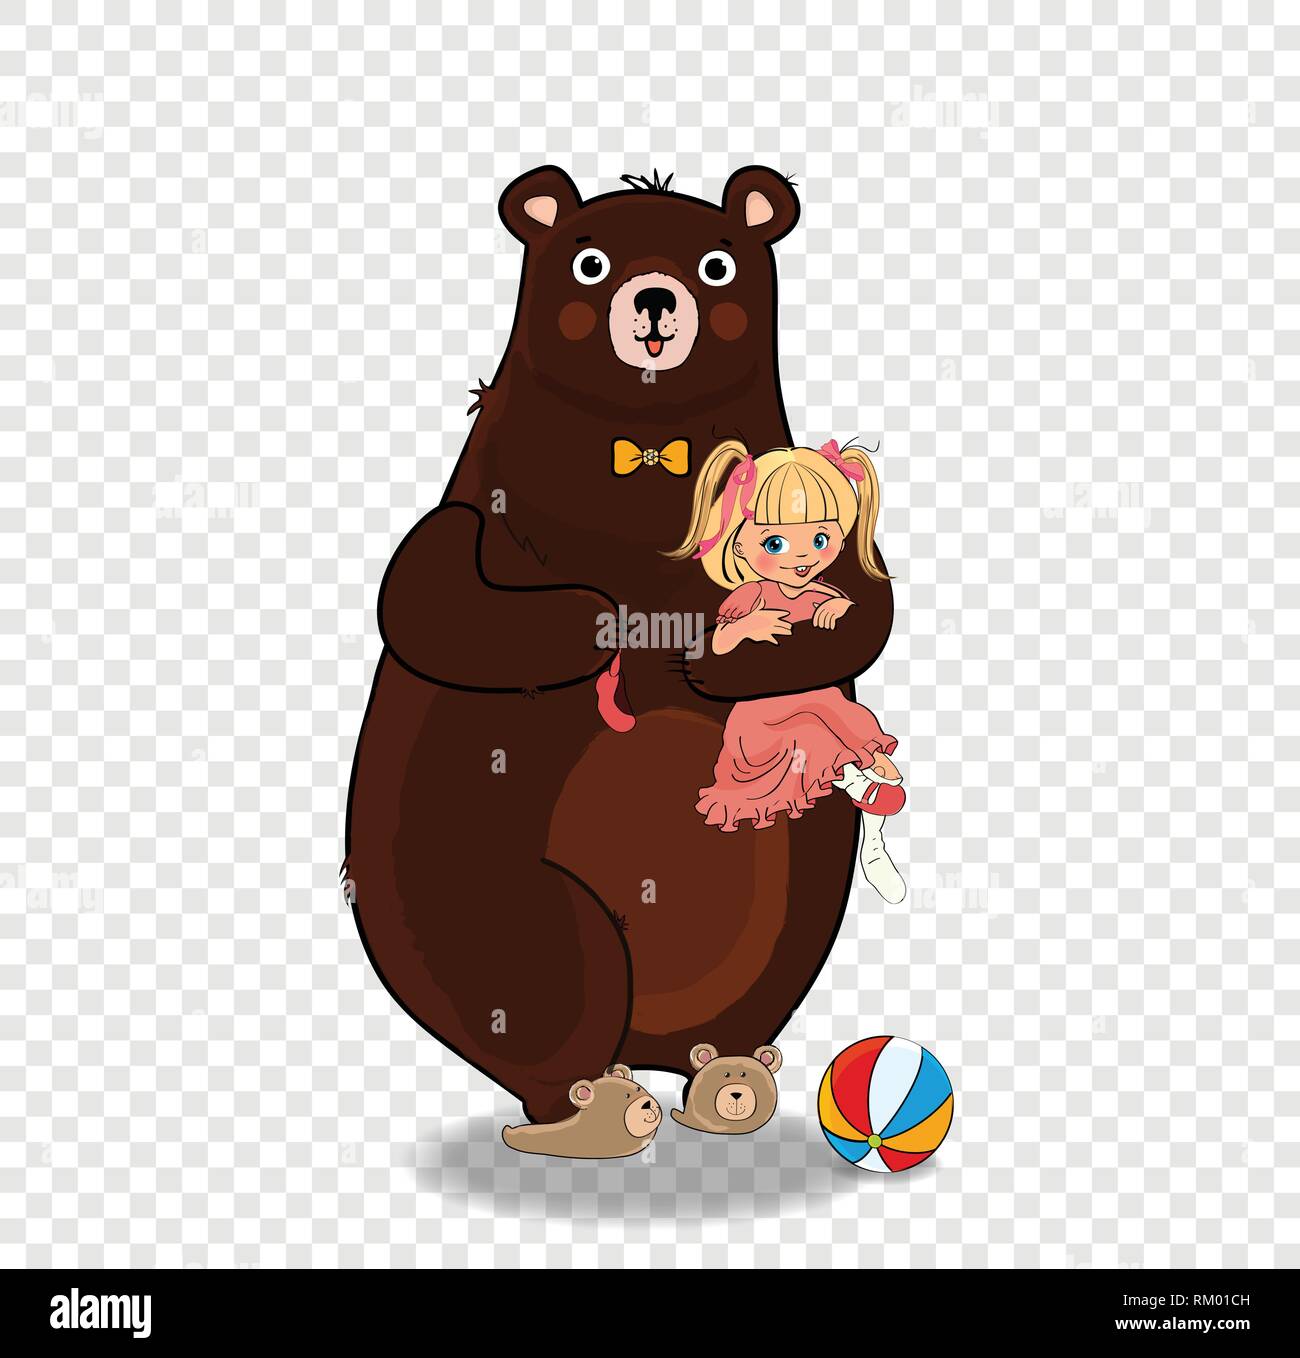 Cute Teddy Bear Wear Neck Tie and Slippers Hugging and Hold in Paws Little Kawaii Barefoot Baby Girl in Pink Princess Dress Isolated on Transparent Ba Stock Vector